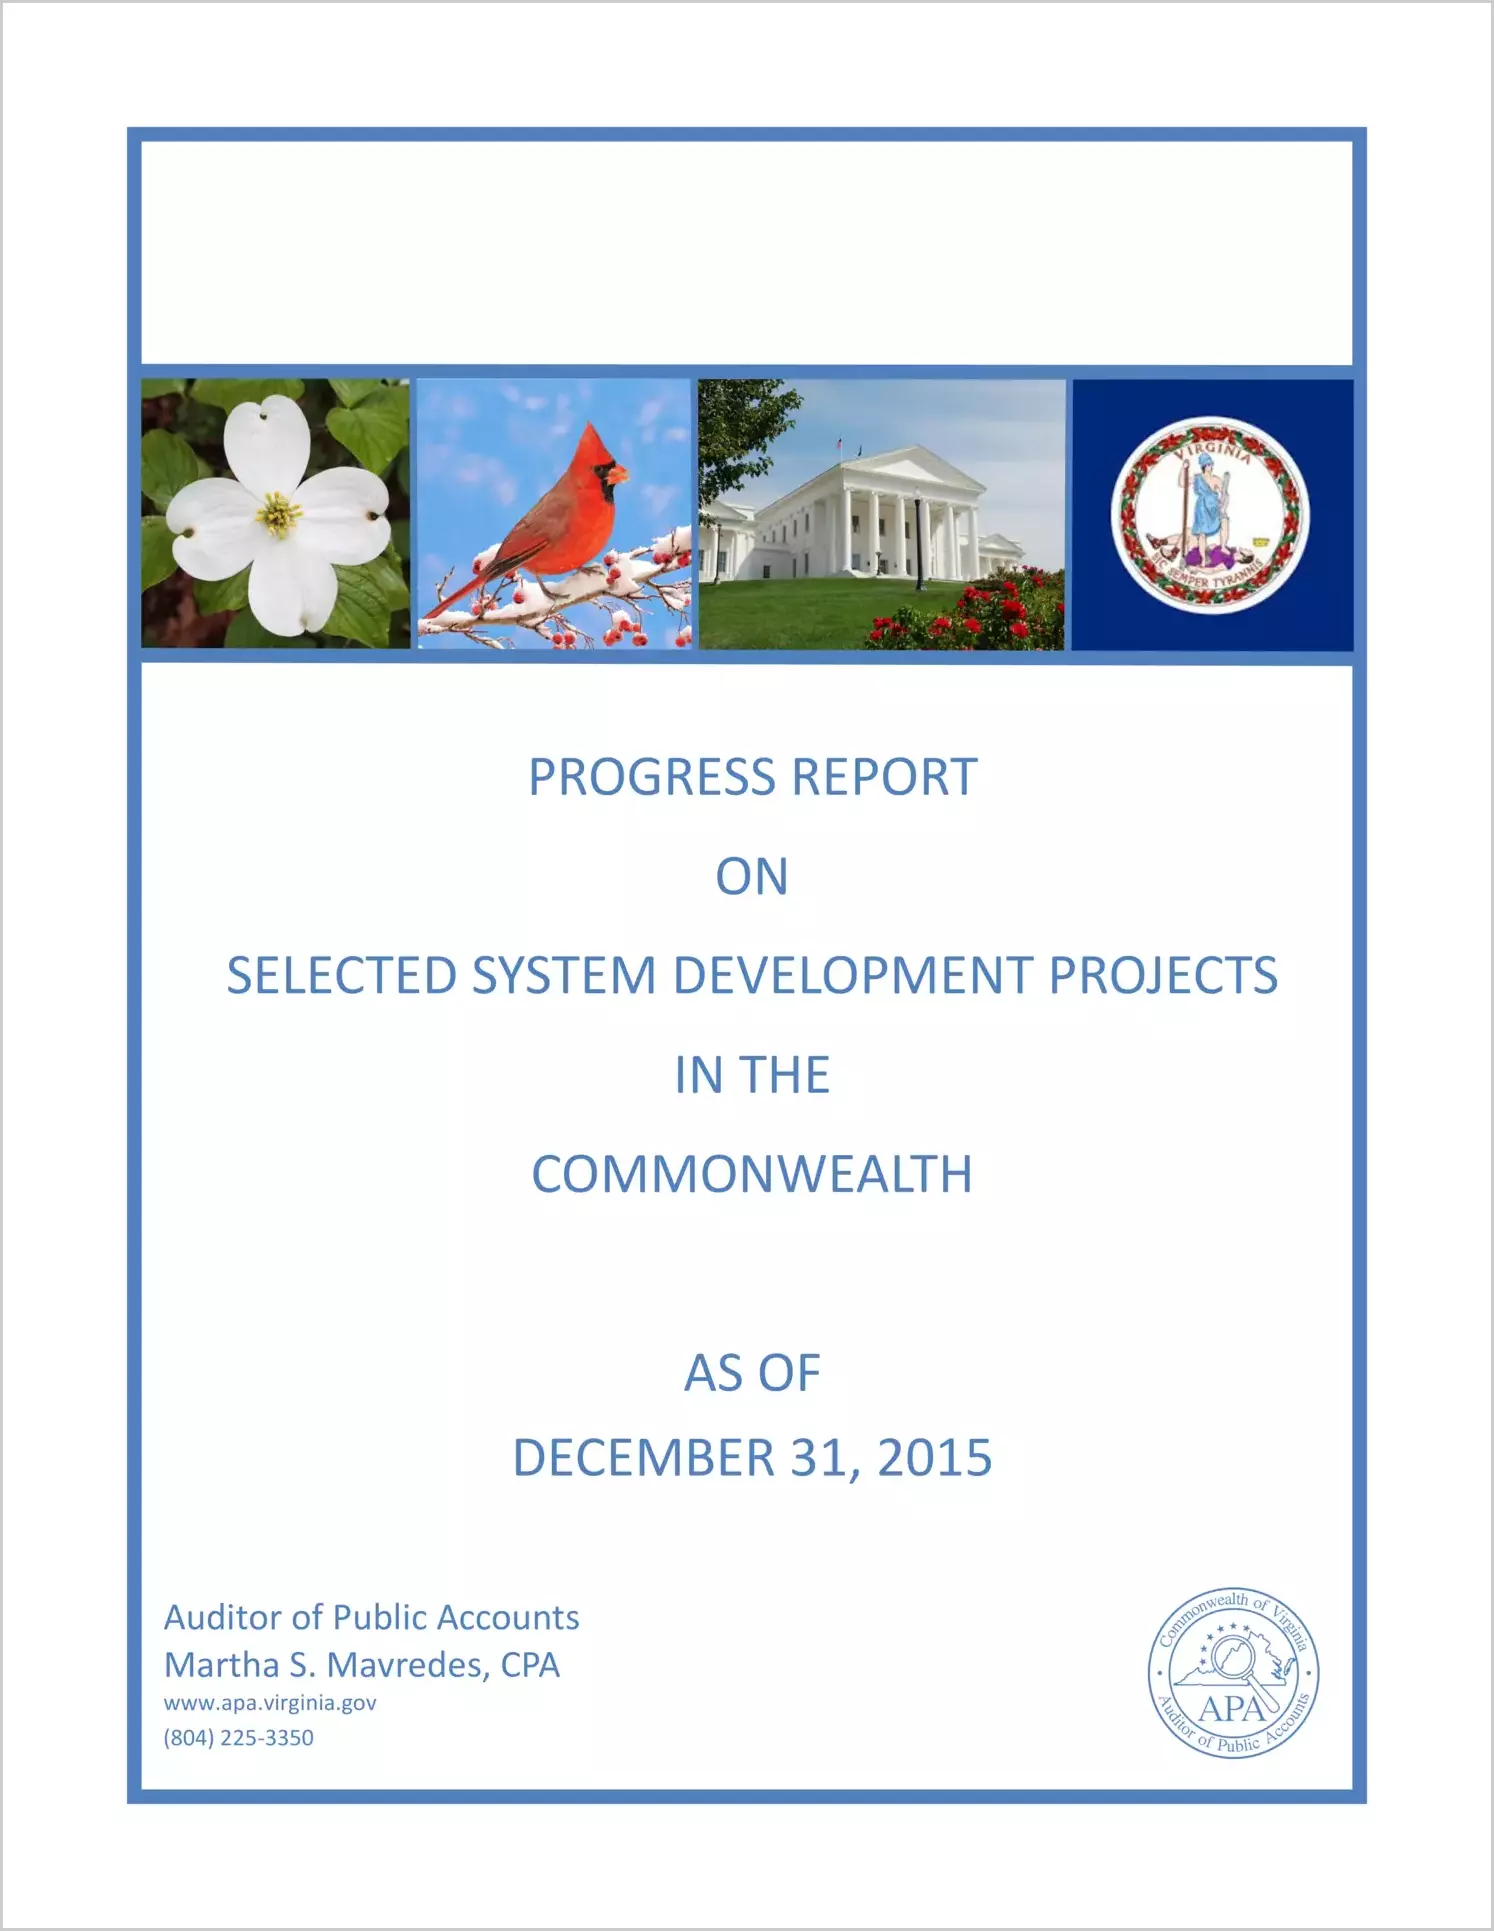 Progress Report on Selected Systems Development Projects in the Commonwealth as of Decemer 31, 2015